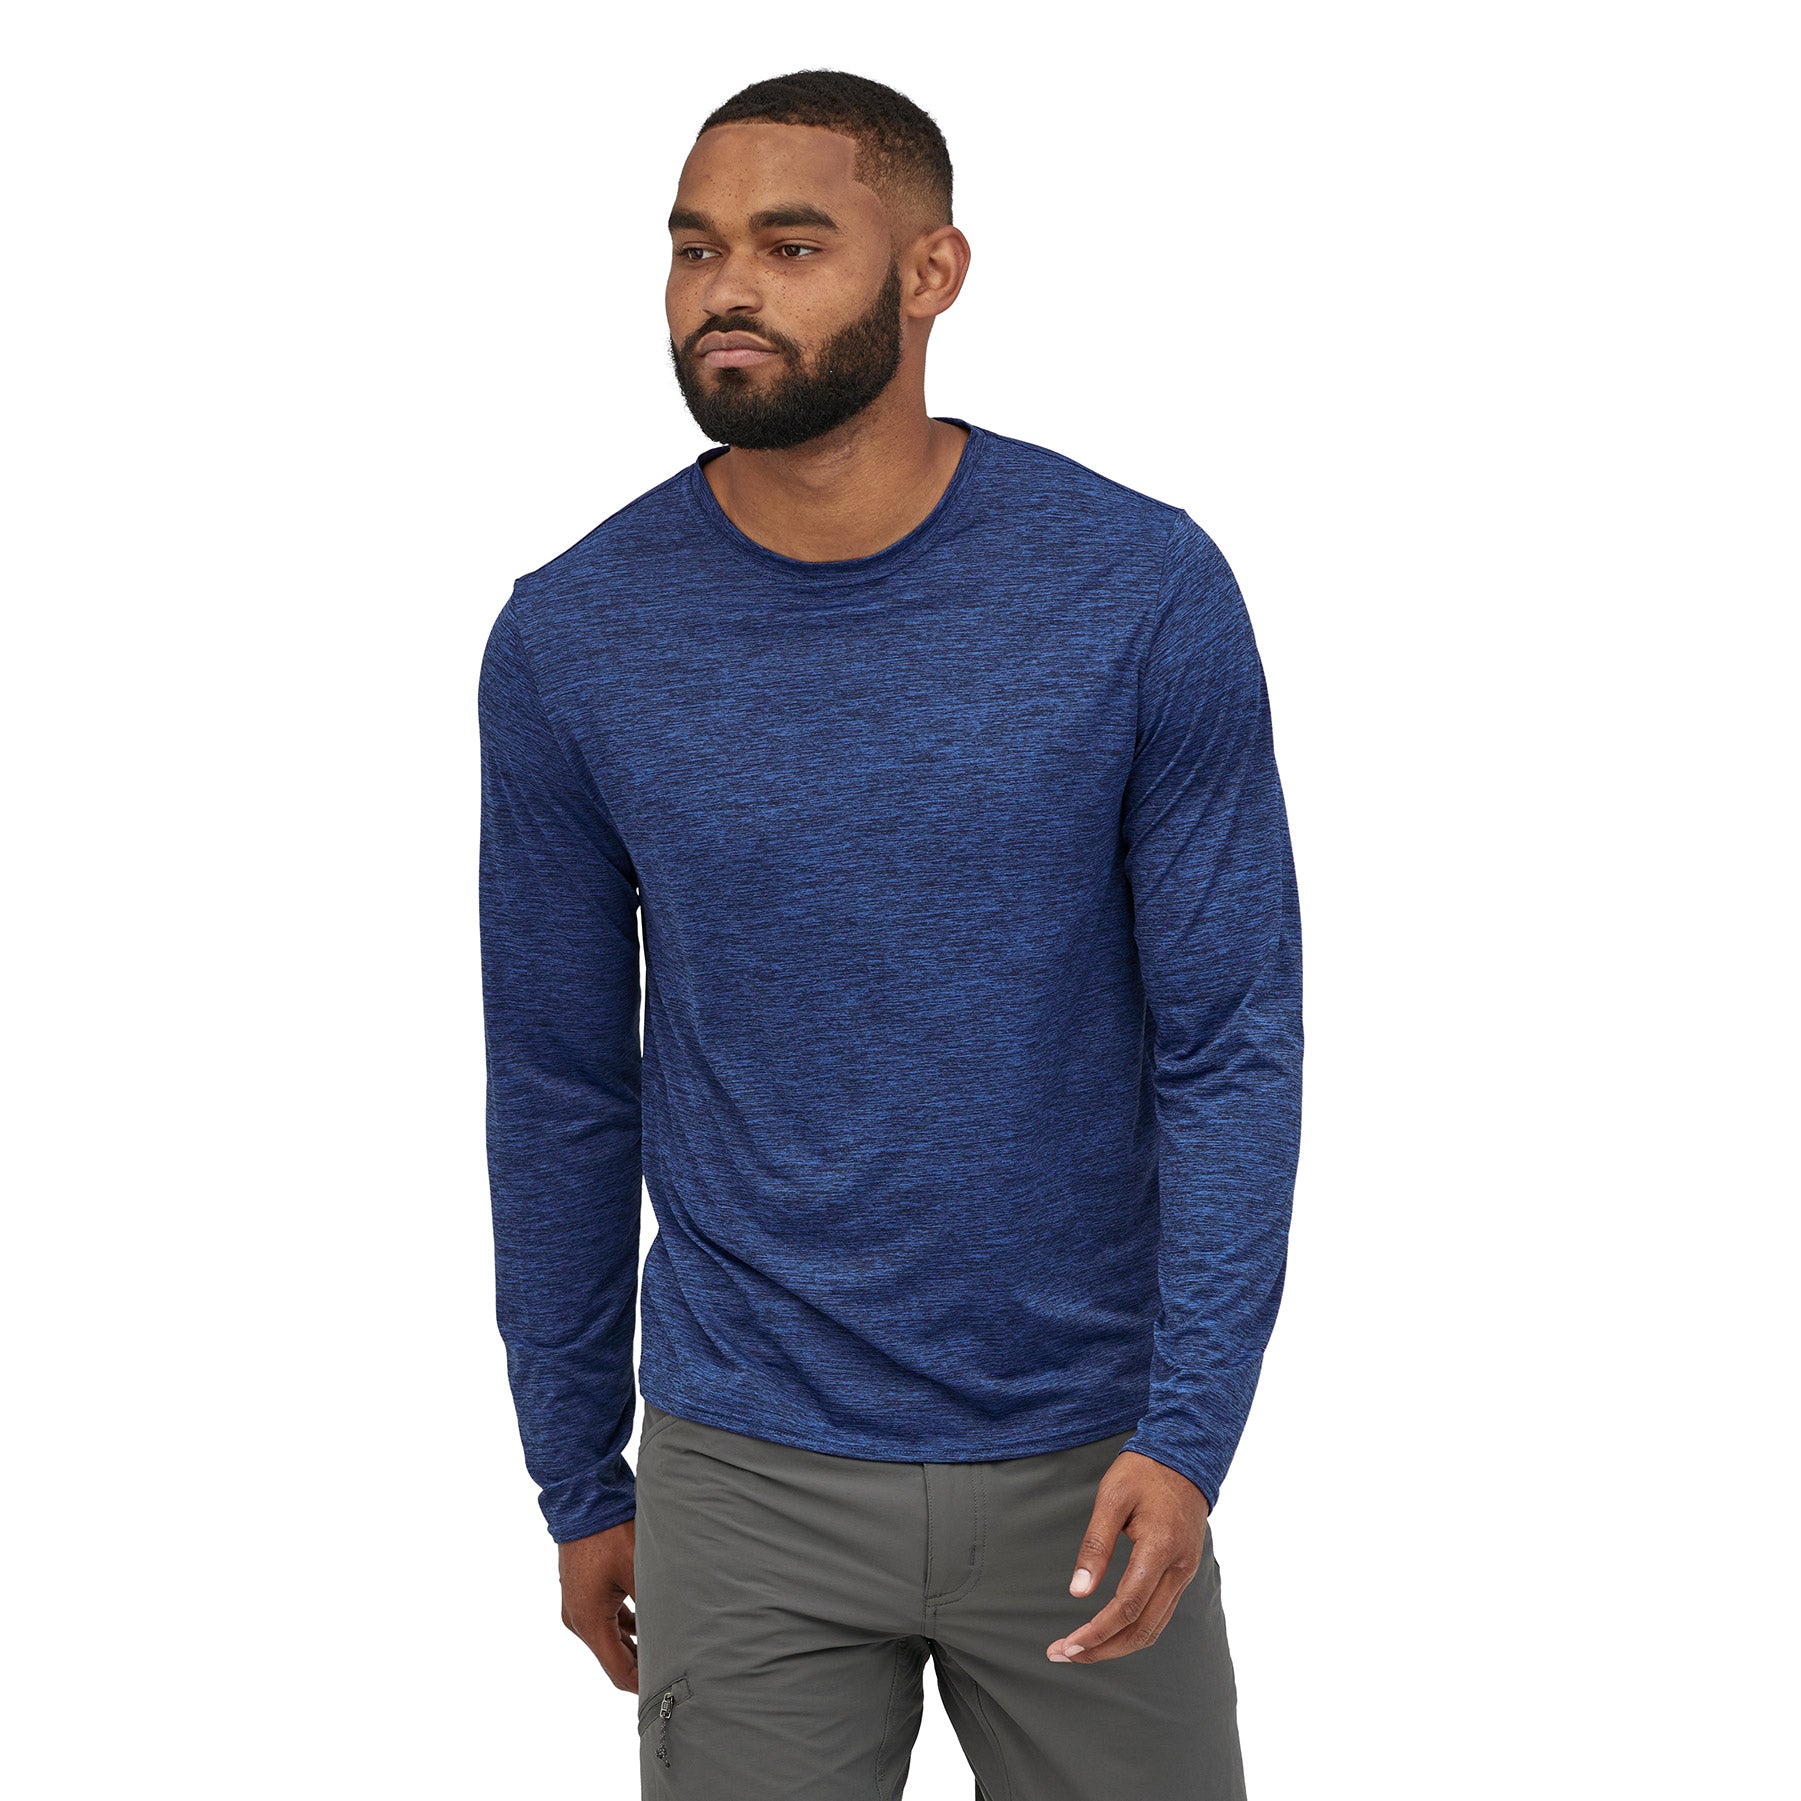 patagonia mens long sleeve capilene cool daily shirt in viking blue navy blue x dye front view on a model